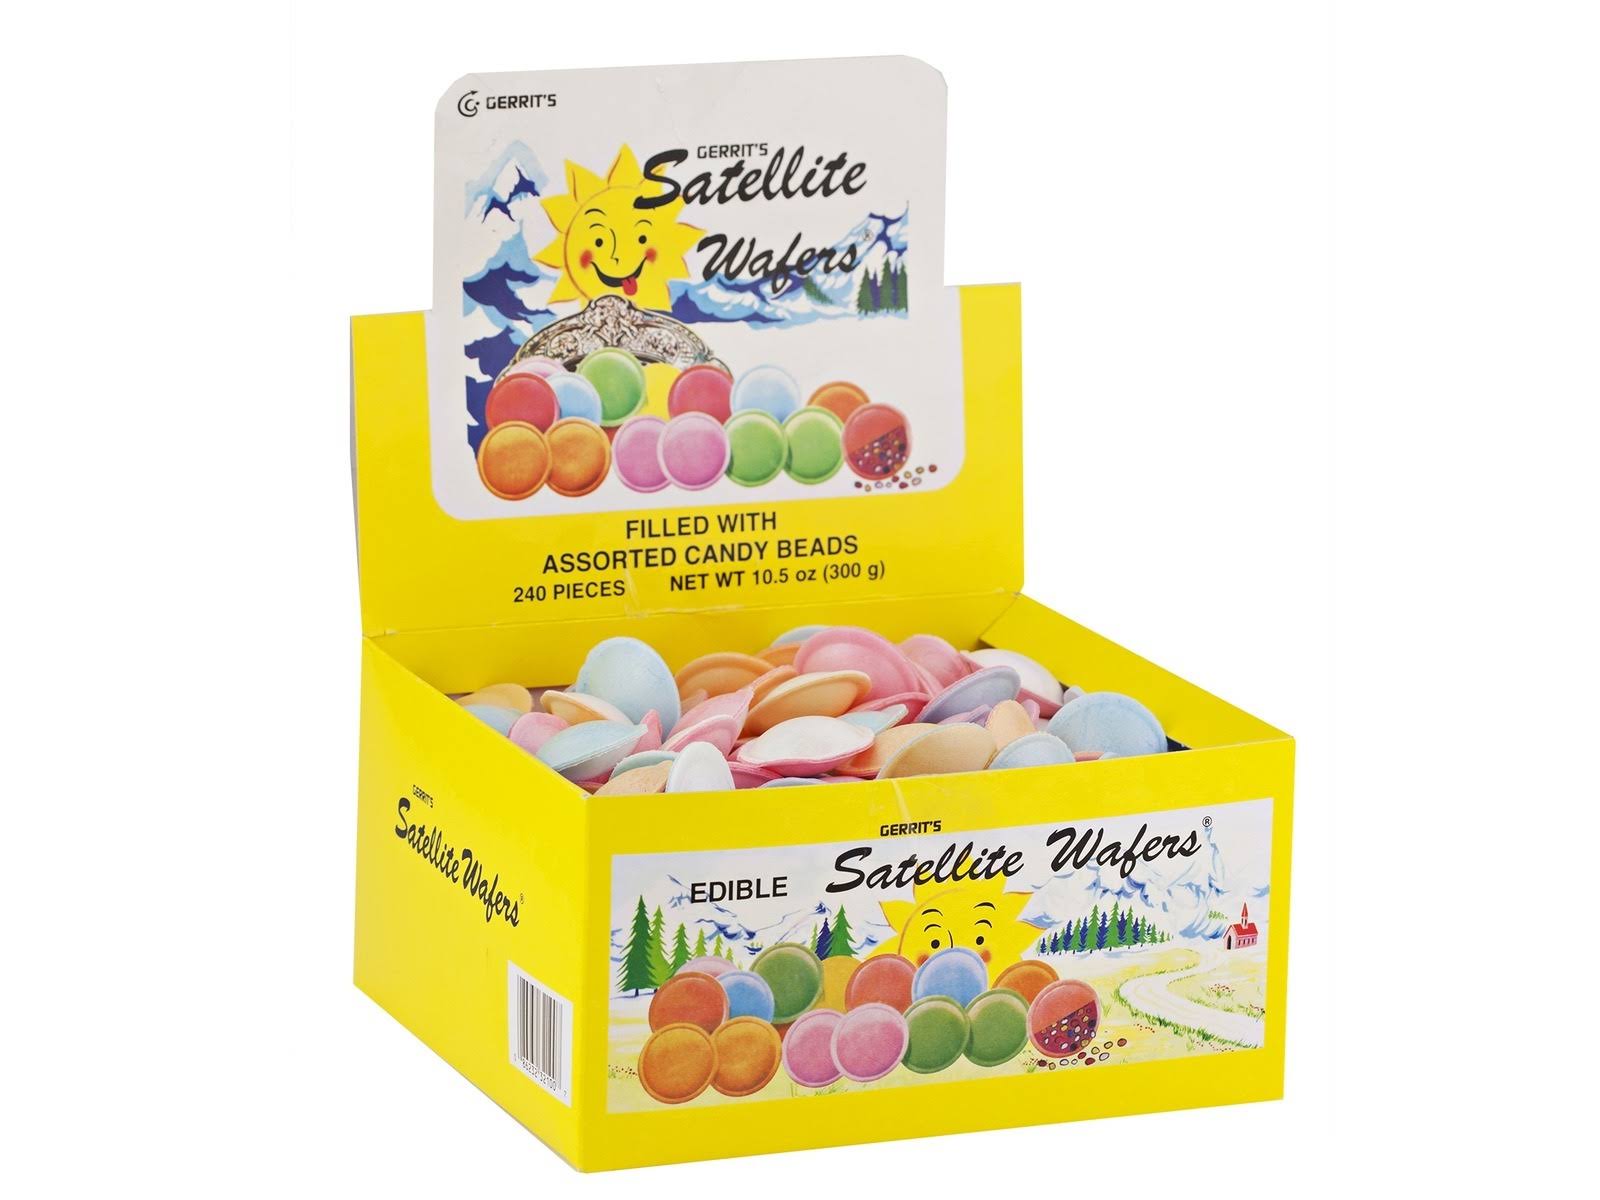 Gerrit's Satellite Wafers - 240ct, Filled with Assorted Candy Beads